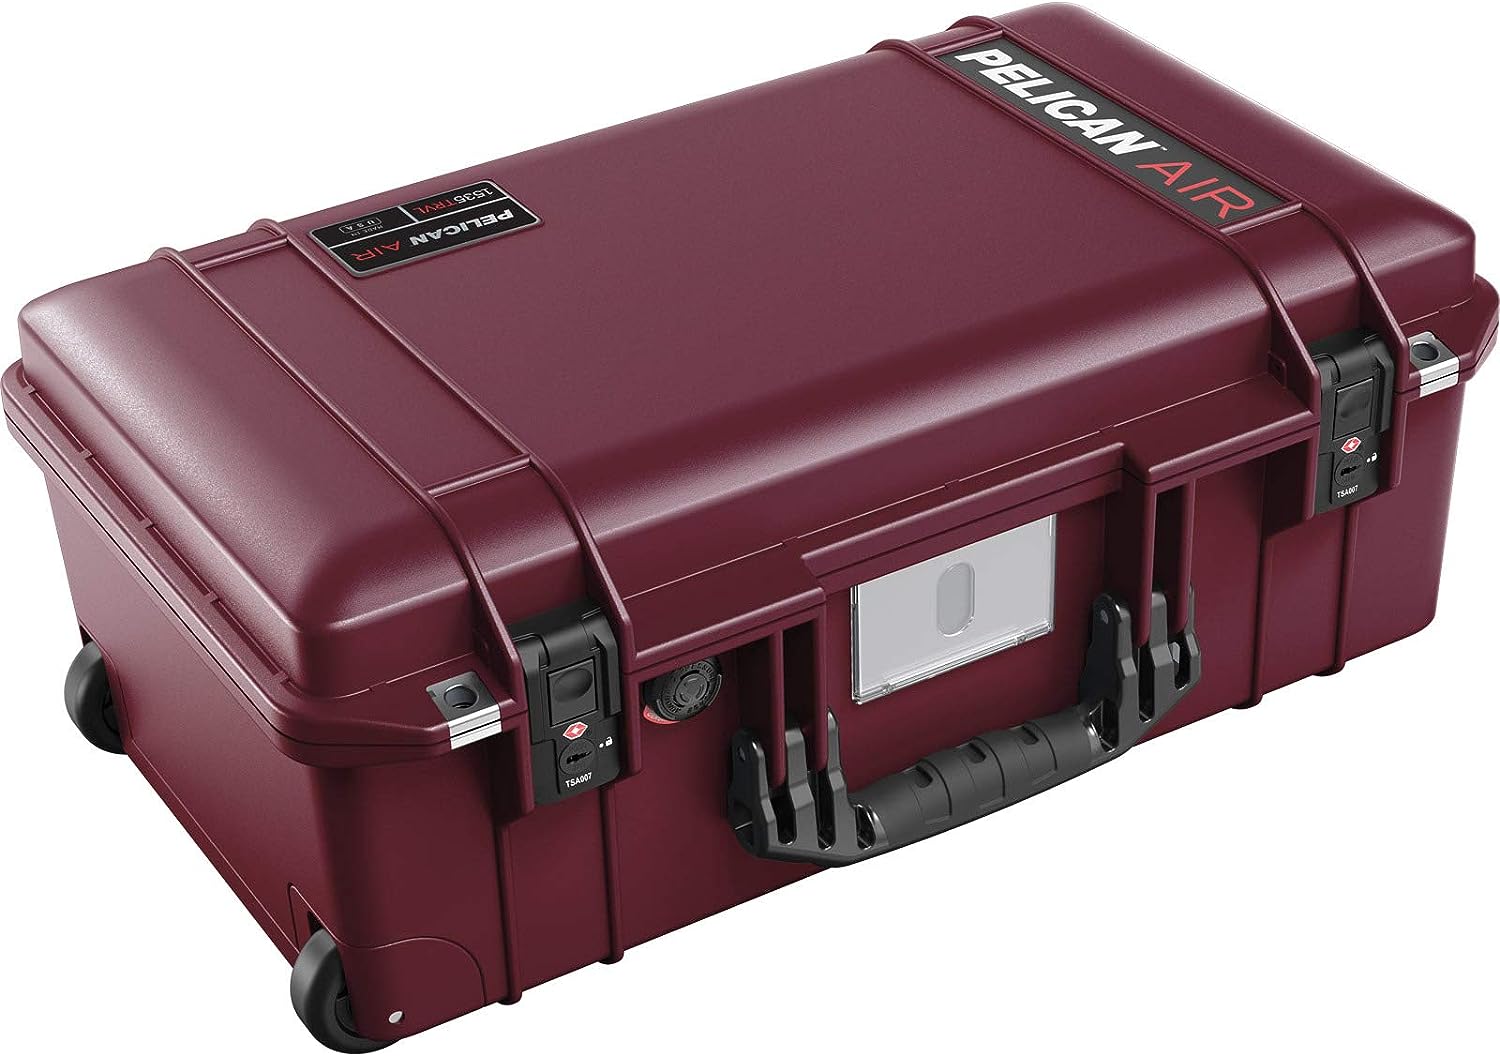 yJ GA[ 1535 gxP[X @ݎו [bh] Pelican Air 1535 Travel Case Carry On Luggage [Red] 015350-0080-175